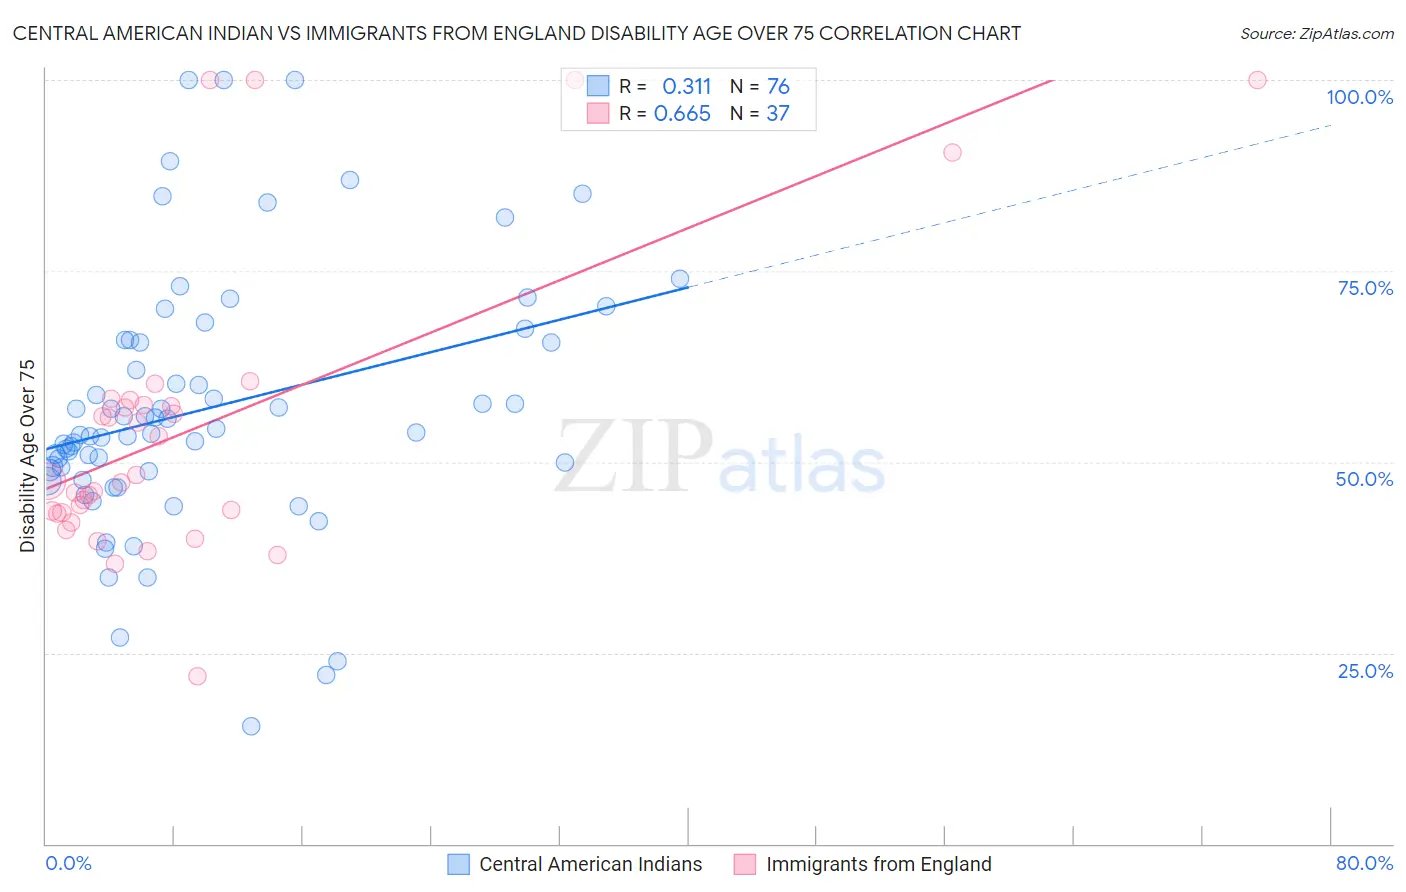 Central American Indian vs Immigrants from England Disability Age Over 75